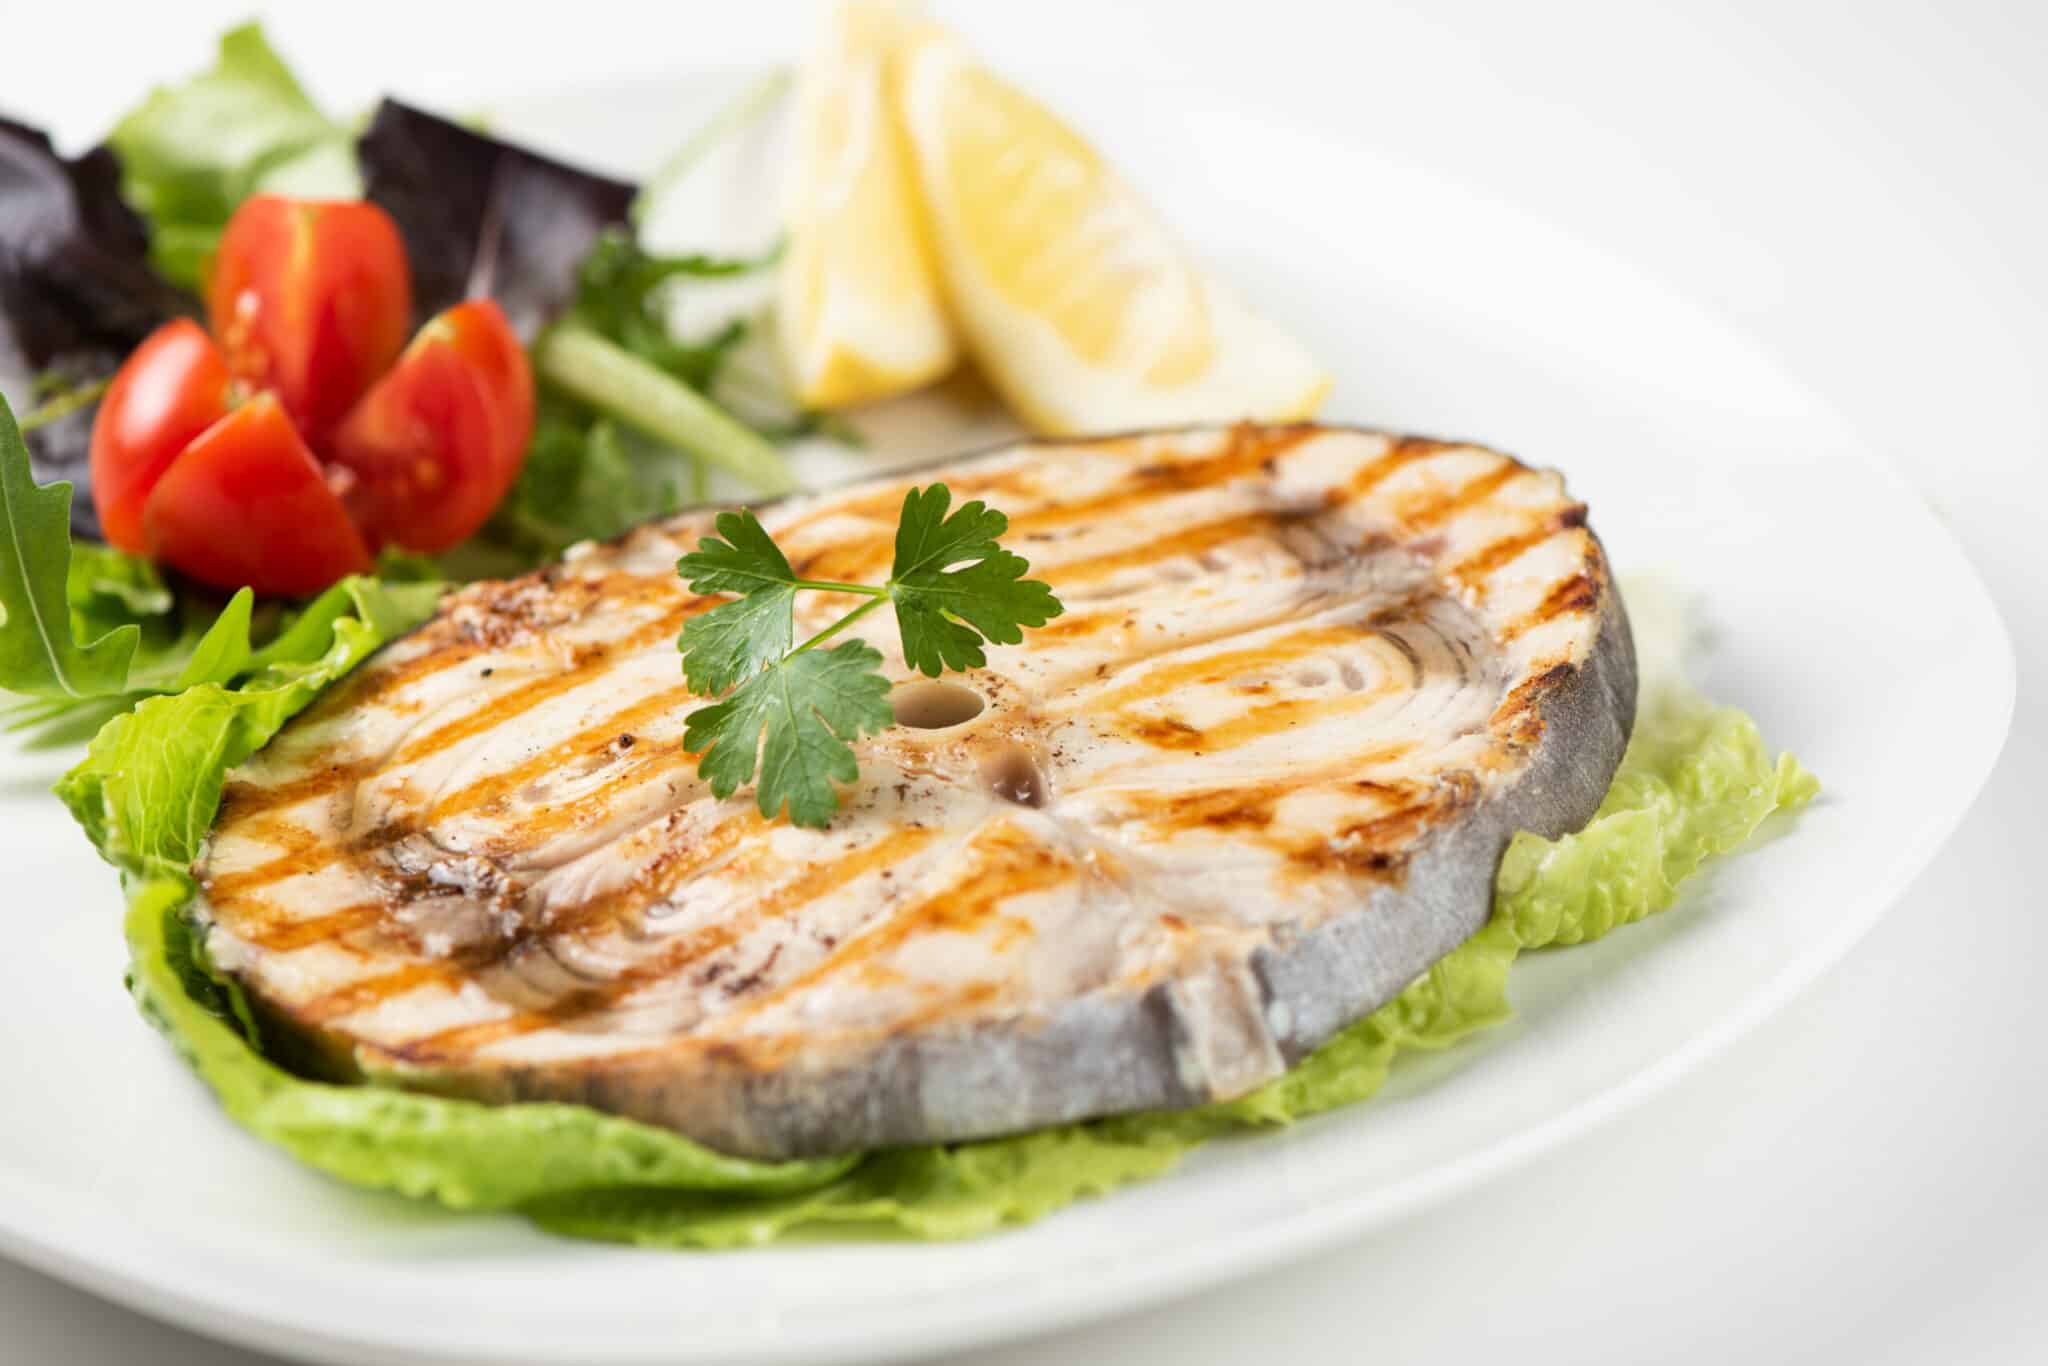 How to Cook Swordfish on the Grill